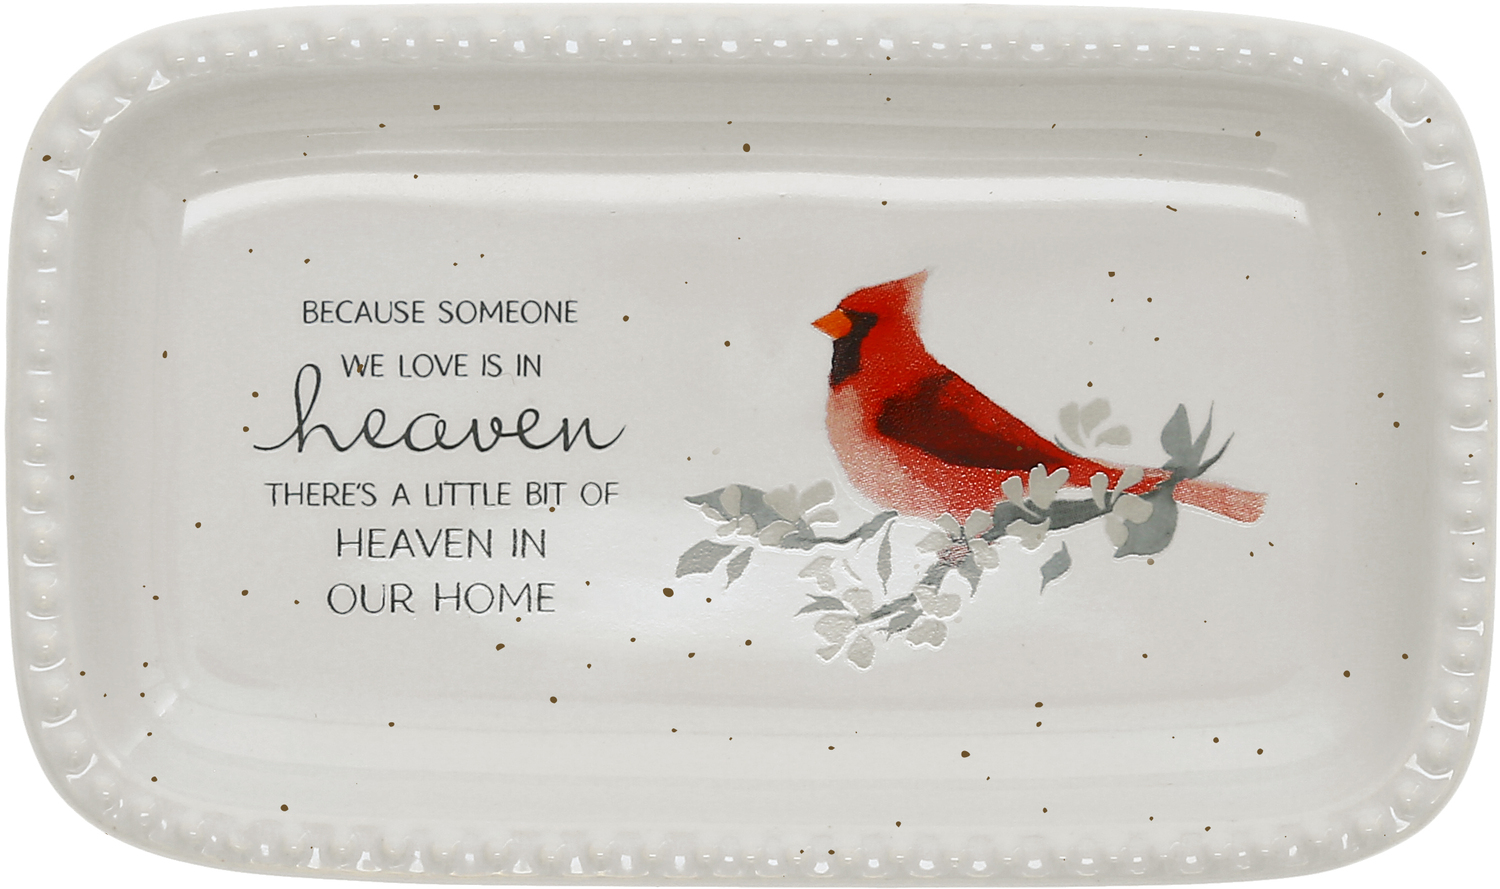 Heaven In Our Home by Always by Your Side - Heaven In Our Home - 5" x 3" Keepsake Dish